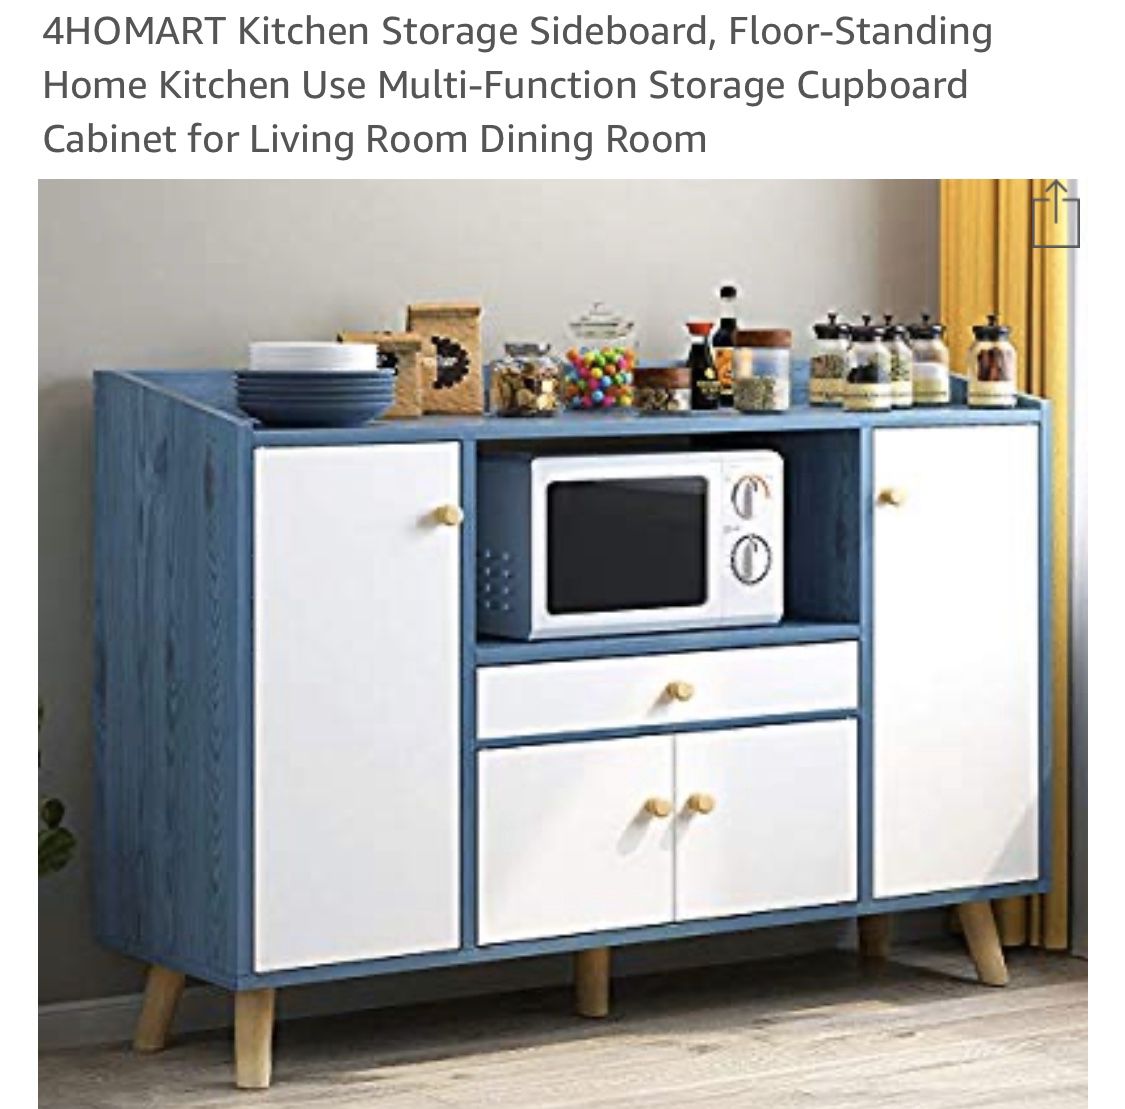 BRAND NEW Floor-Standing Home Kitchen Use Multi-Function Storage Cupboard Cabinet for Living Room Dining Room